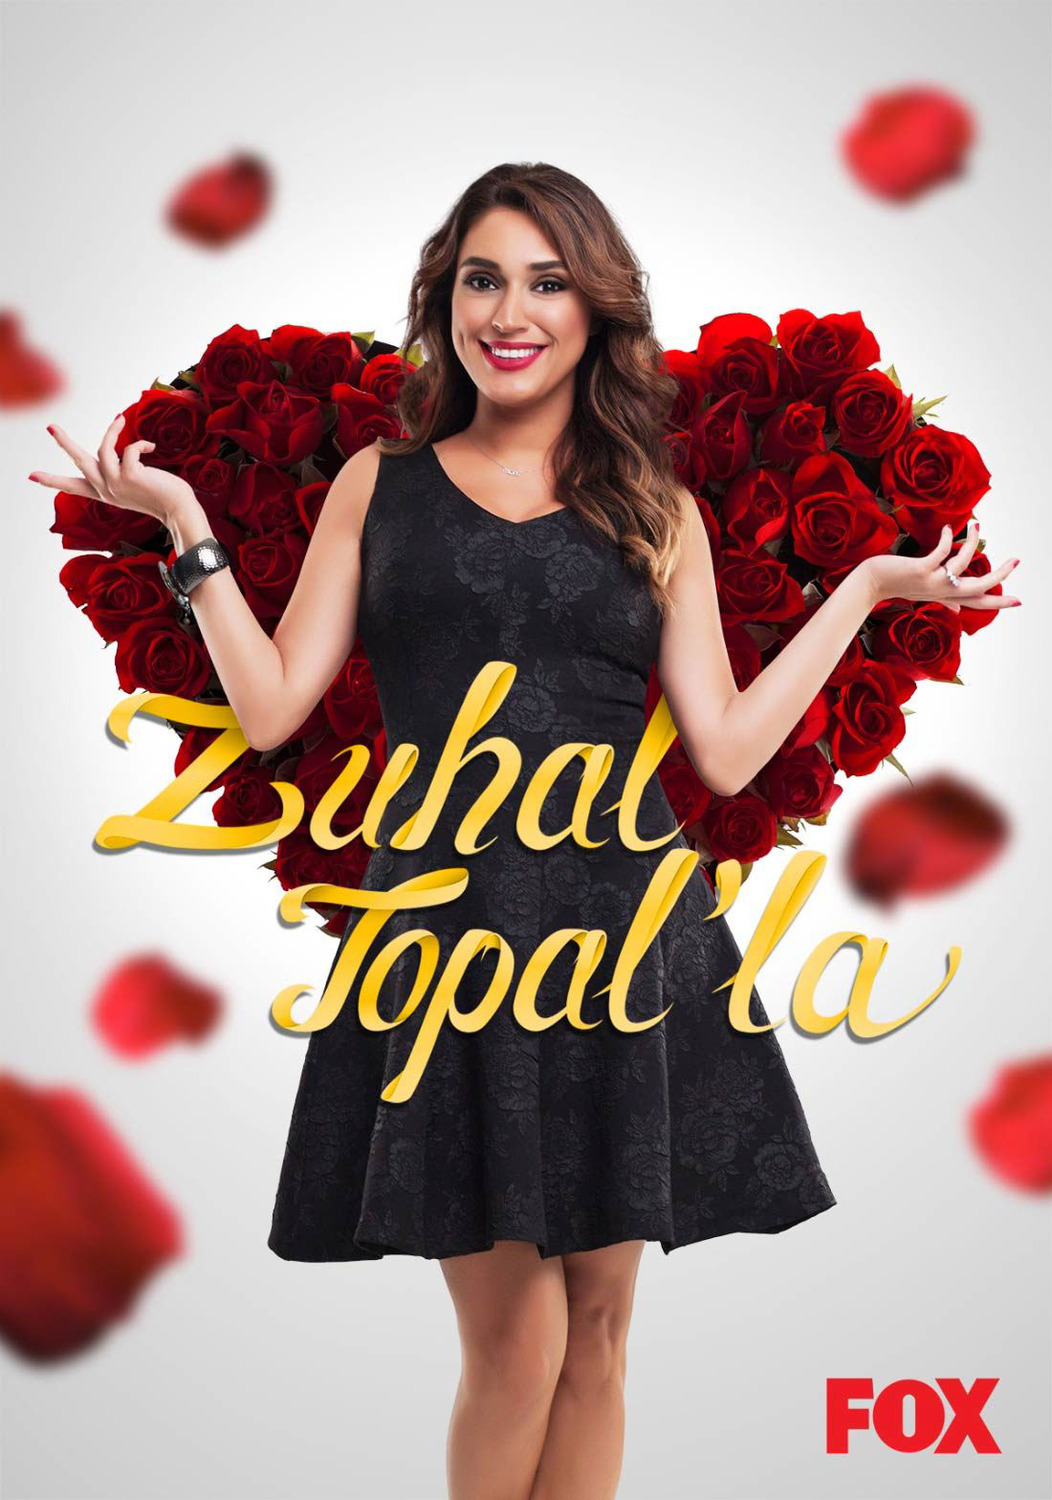 Extra Large TV Poster Image for Zuhal Topalla 